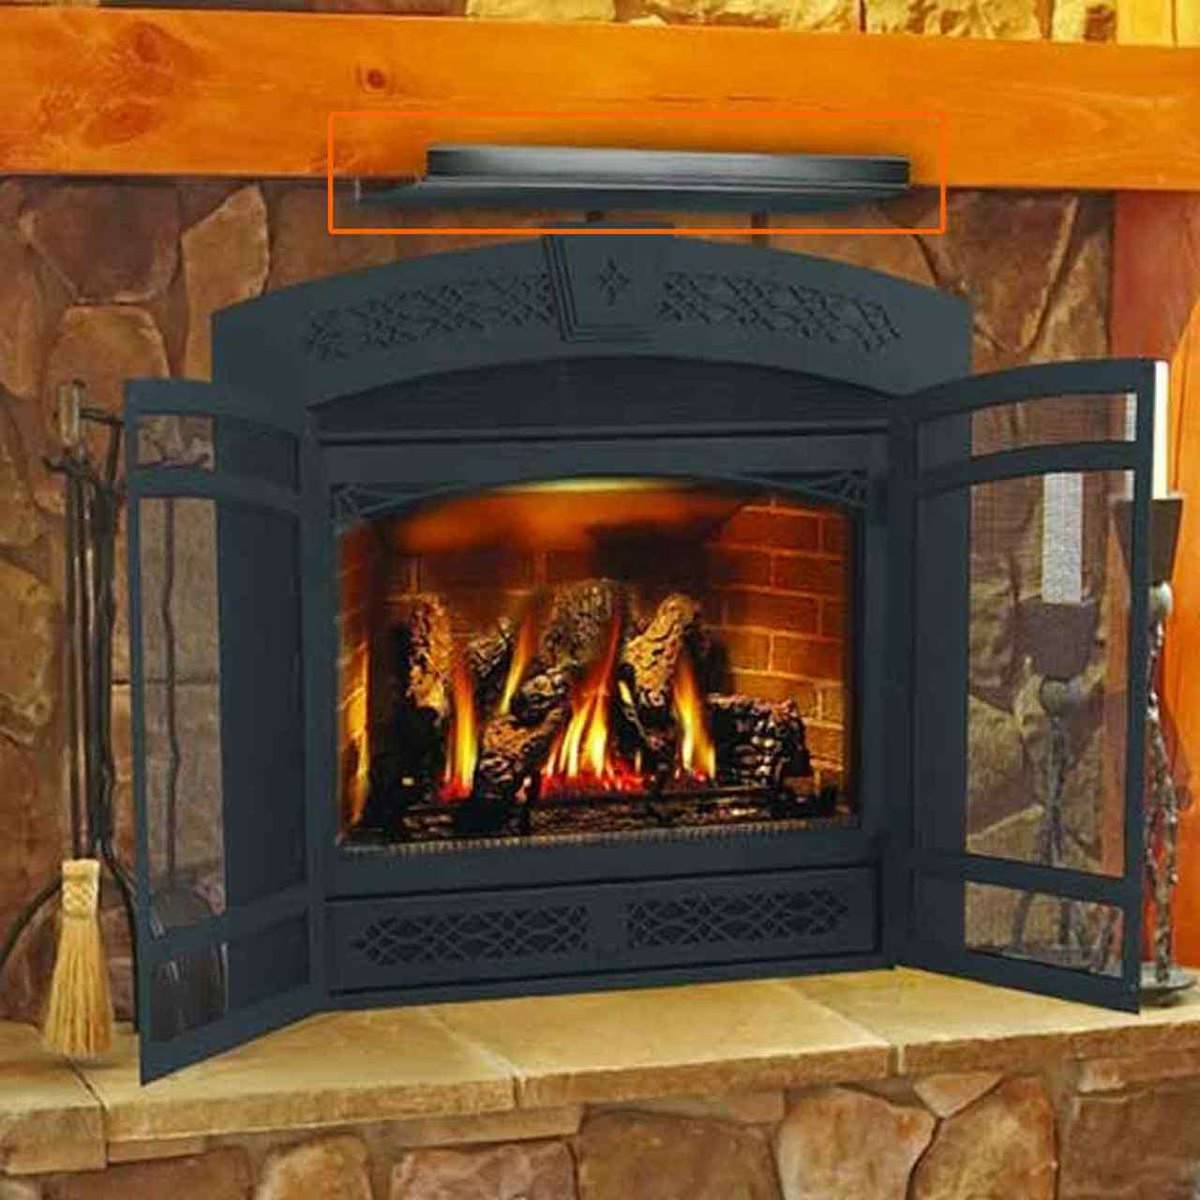 Fireplace Heat Shield Provides Benefits to Your Home in Illinois